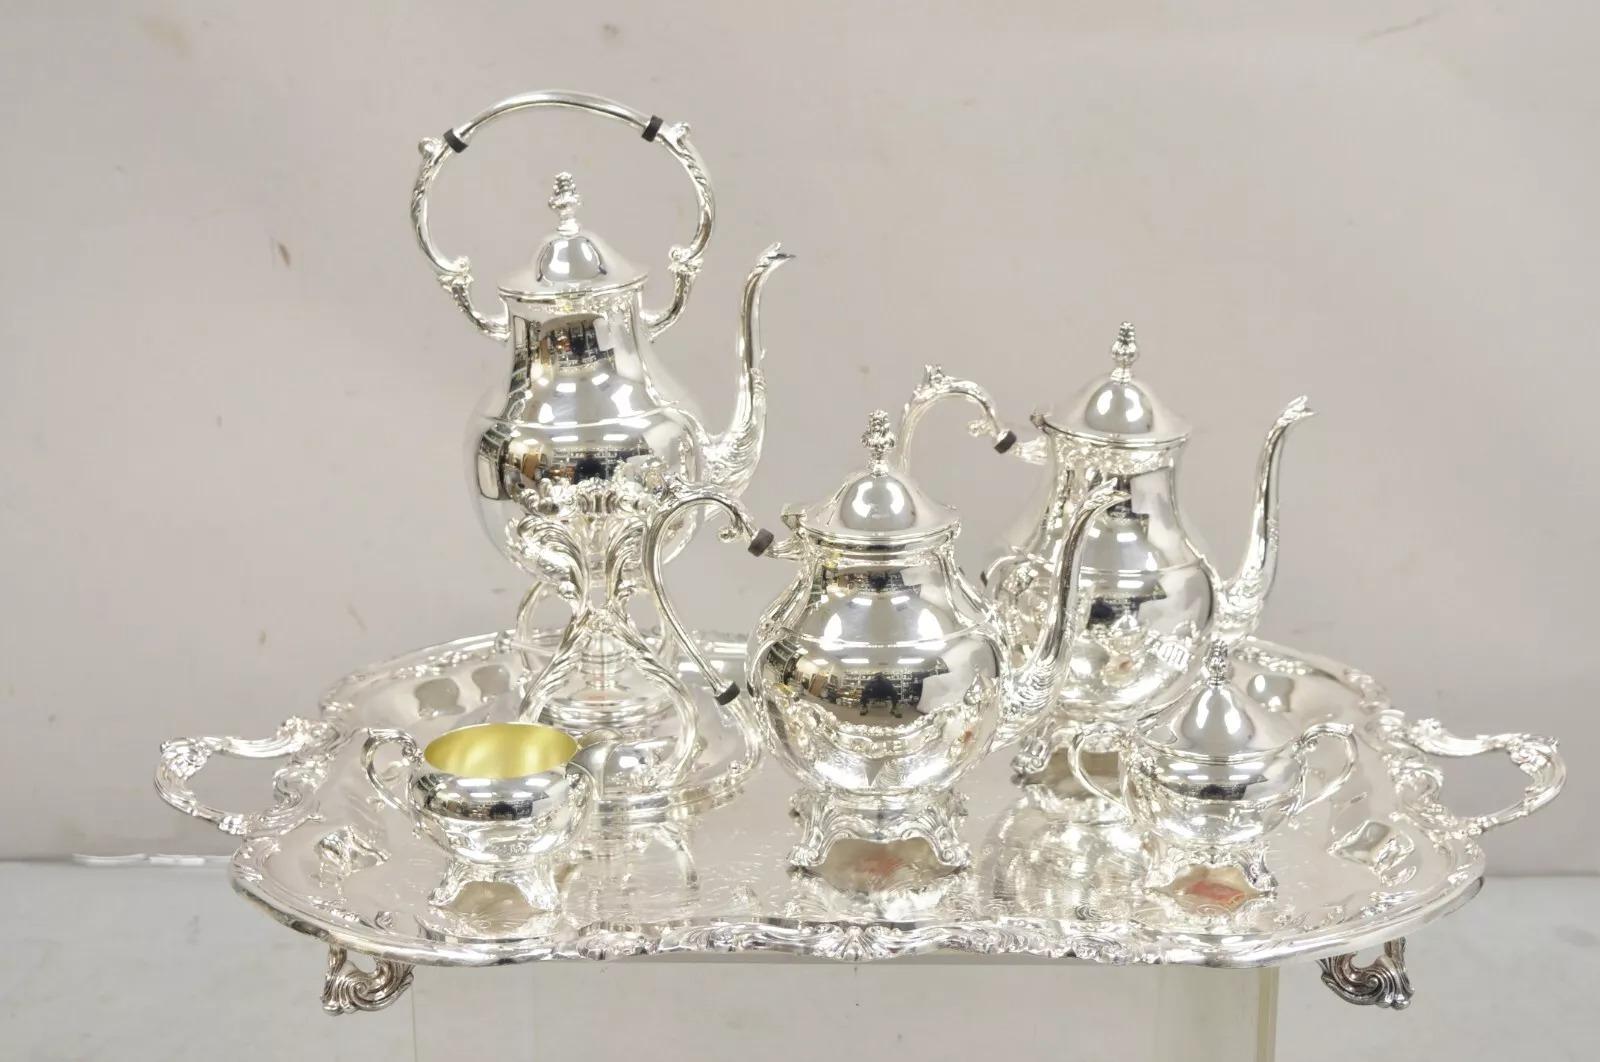 Vintage By Rogers Victorian Style Silver Plated Tea Set with Tilting Pot - 6 Pc Set. Circa Mid to Late 20th Century.
Mesures :  
Plateau : 2,5